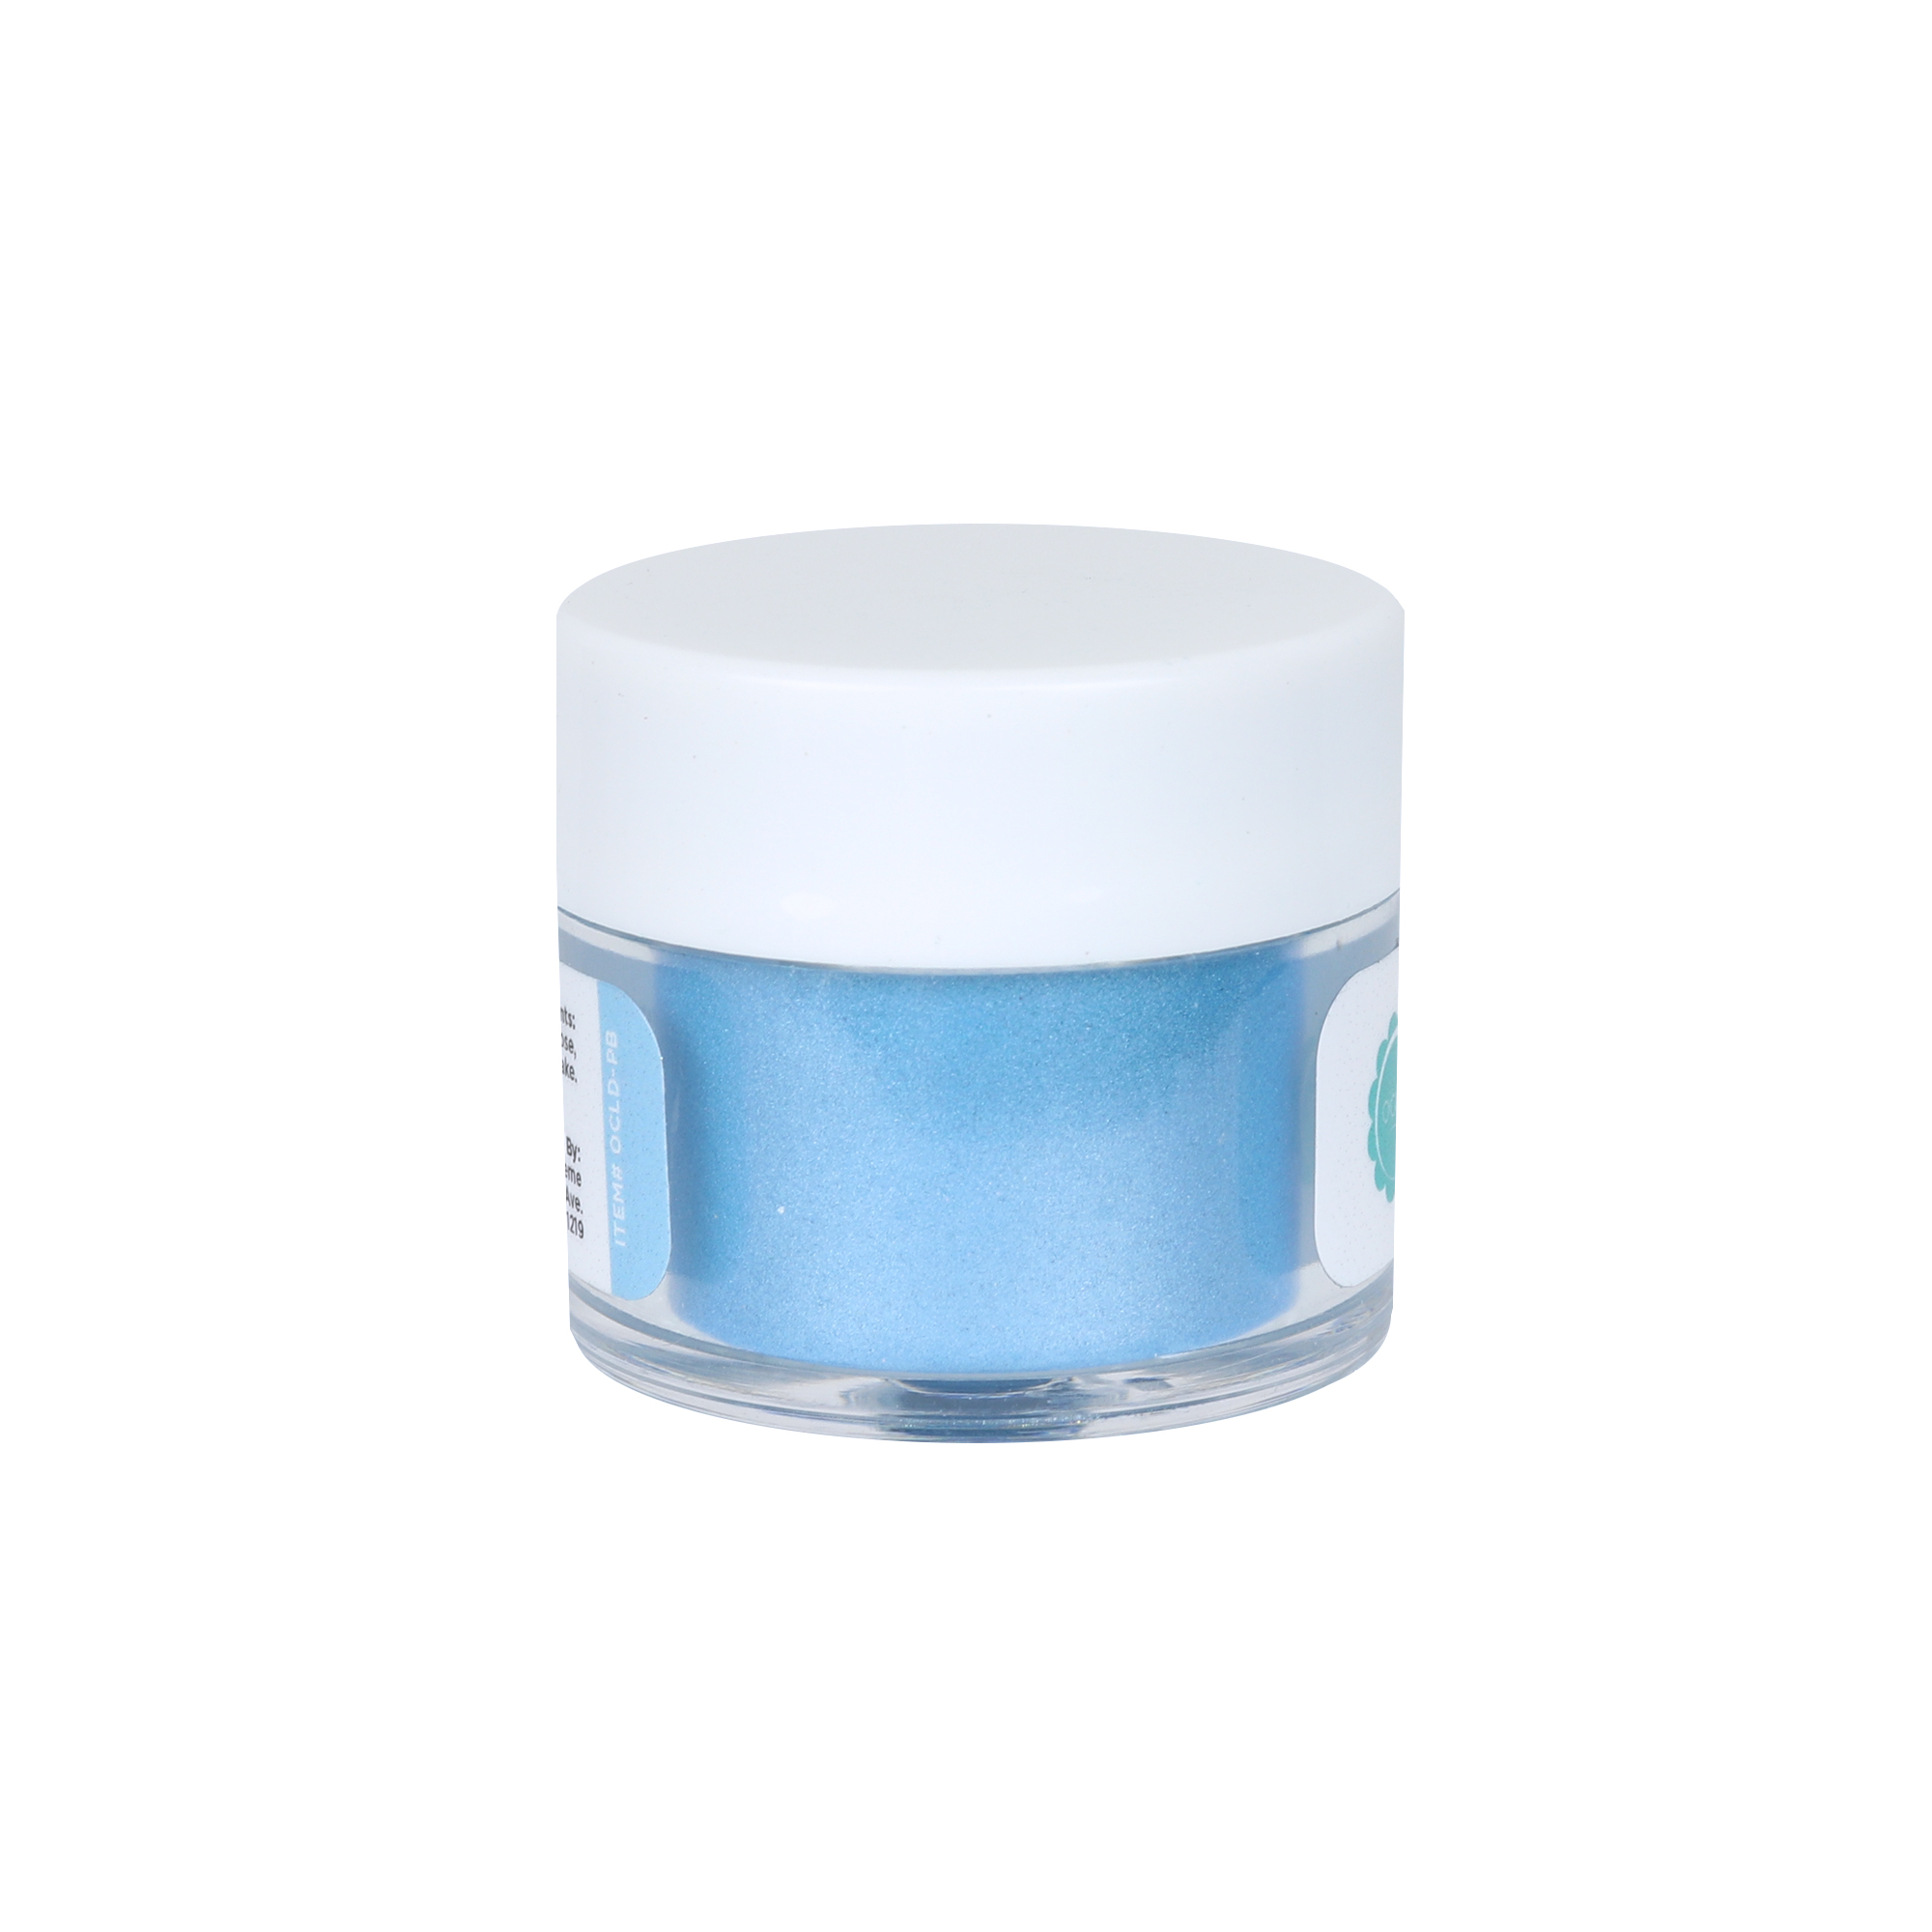 O'Creme Periwinkle Blue Luster Dust, 4 gr. image 2